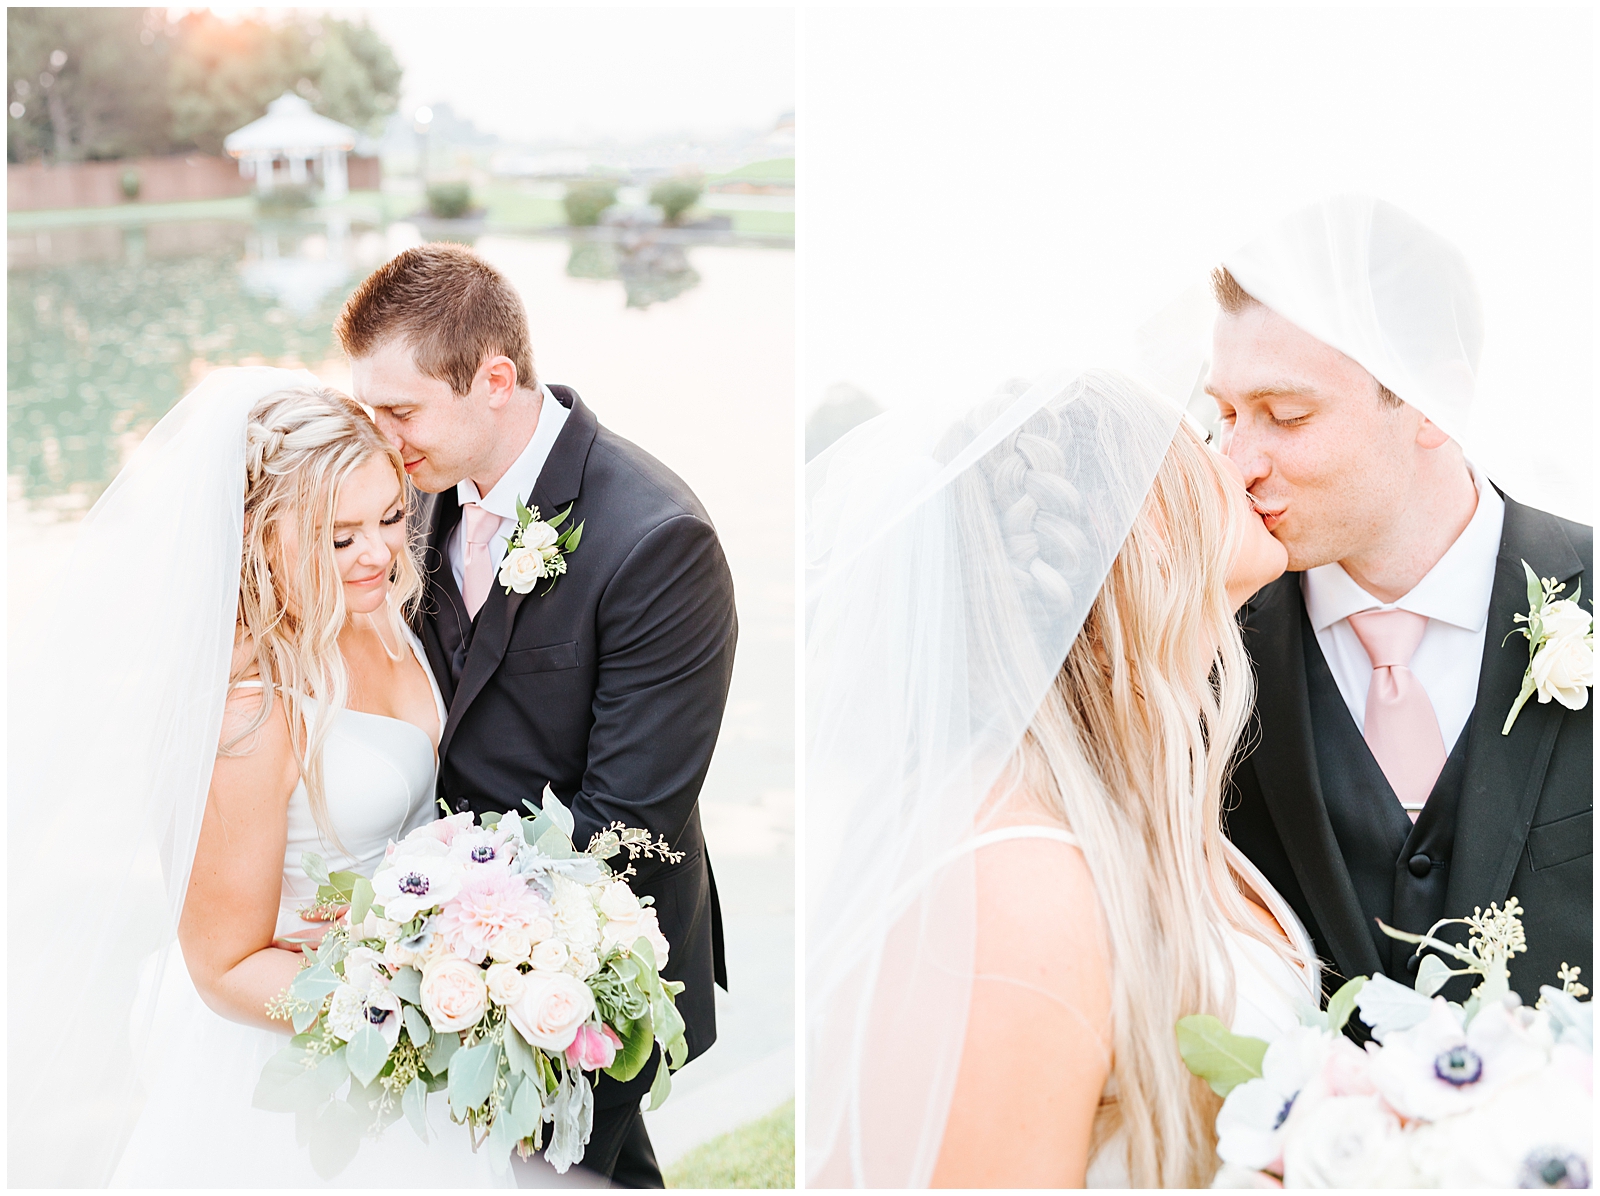 Husband and Wife Golden hour Portraits at August Still Water Hollow Wedding with Swooping Veil